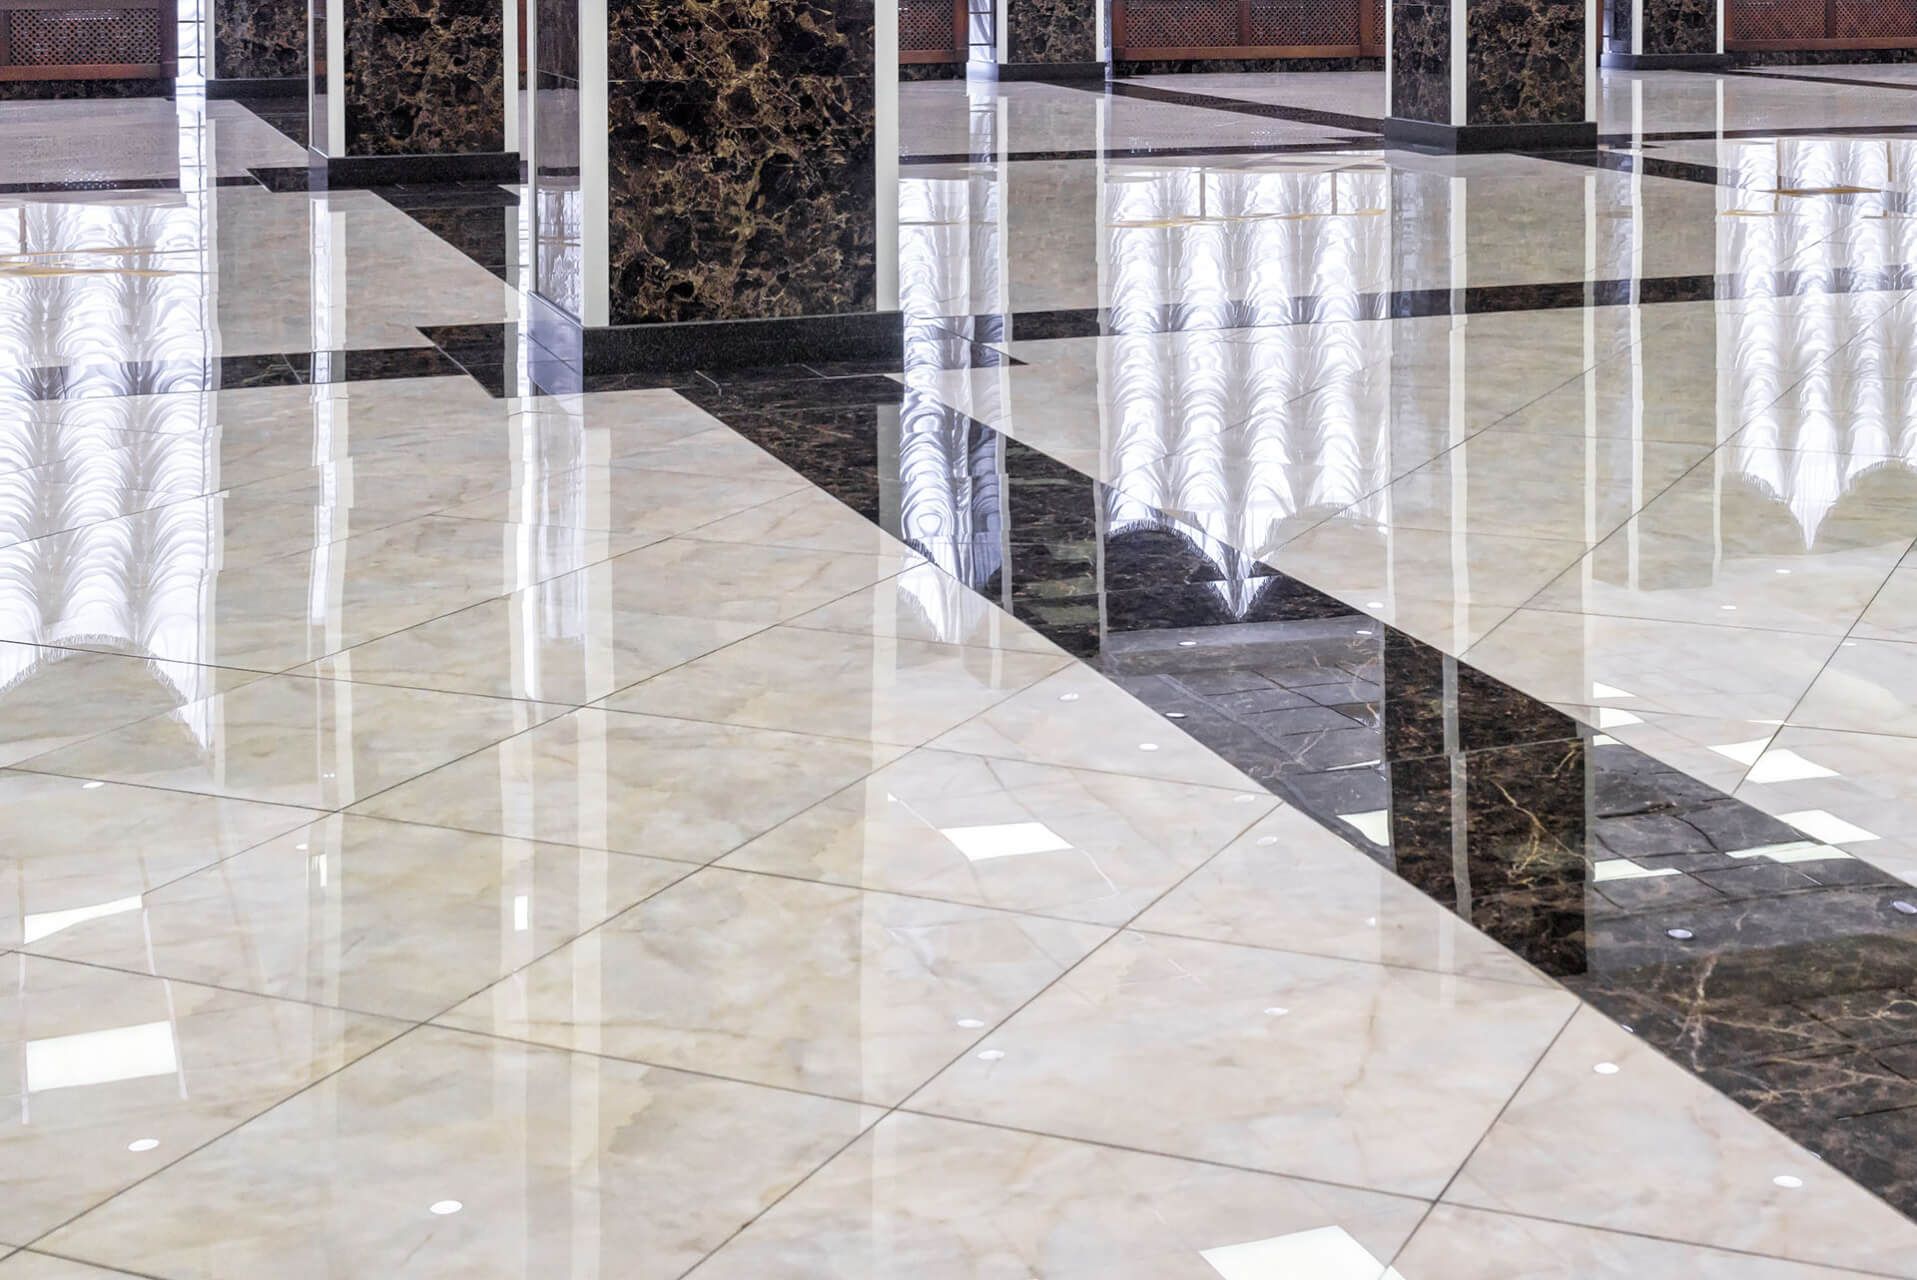 The hotel lobby with a marble floor clean and shiny.